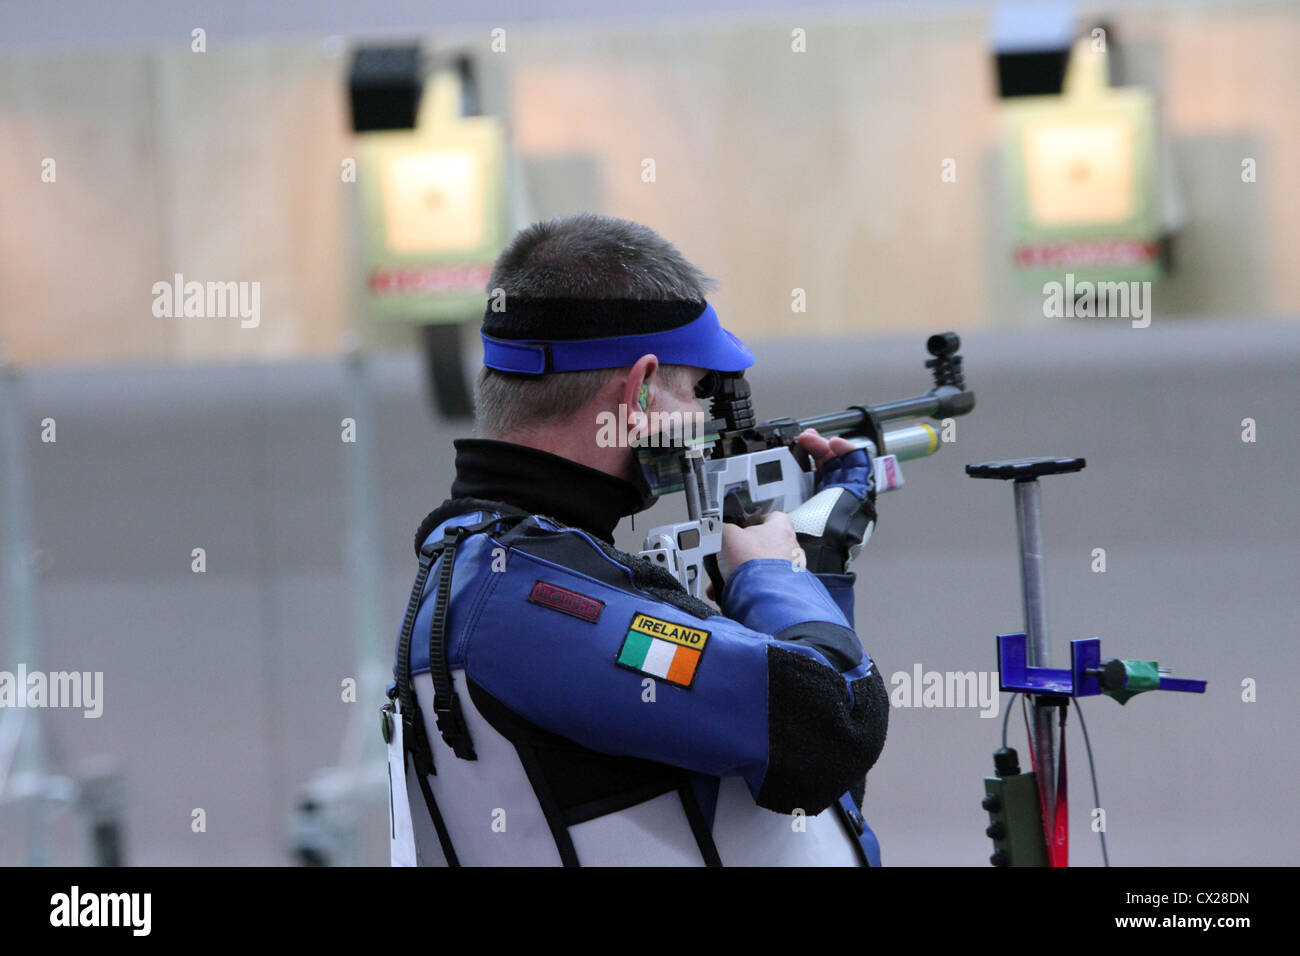 Sean Baldwin of Ireland in the Men's R1-10m Air Rifle Standing SH1 shooting competition at the Royal artillery barracks Stock Photo